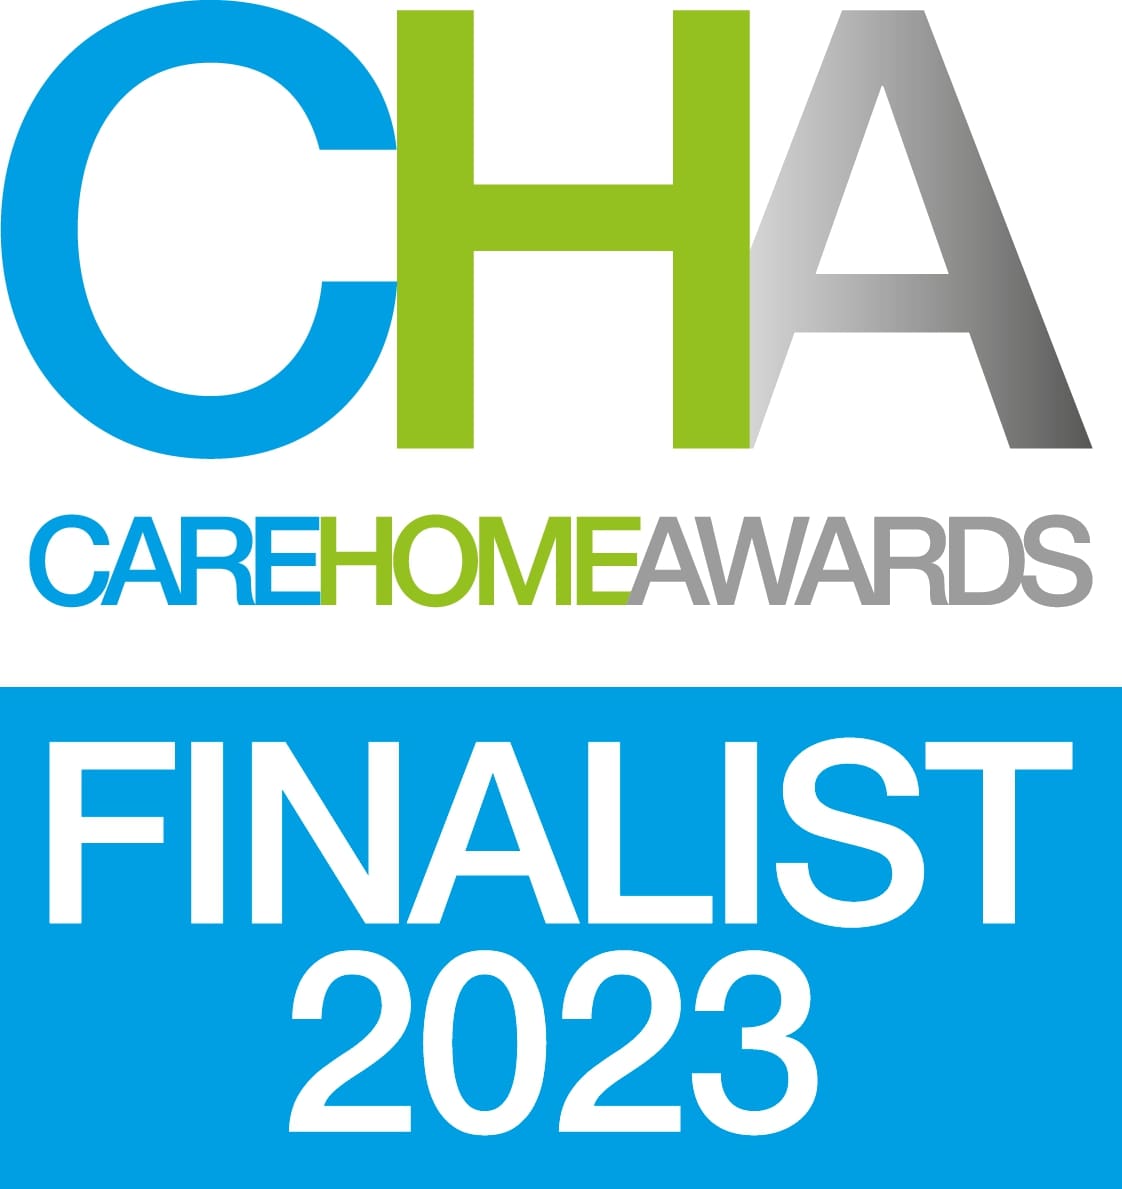 Care Home Awards 2023 finalist - Best for Communication and Use of Digital Channels 